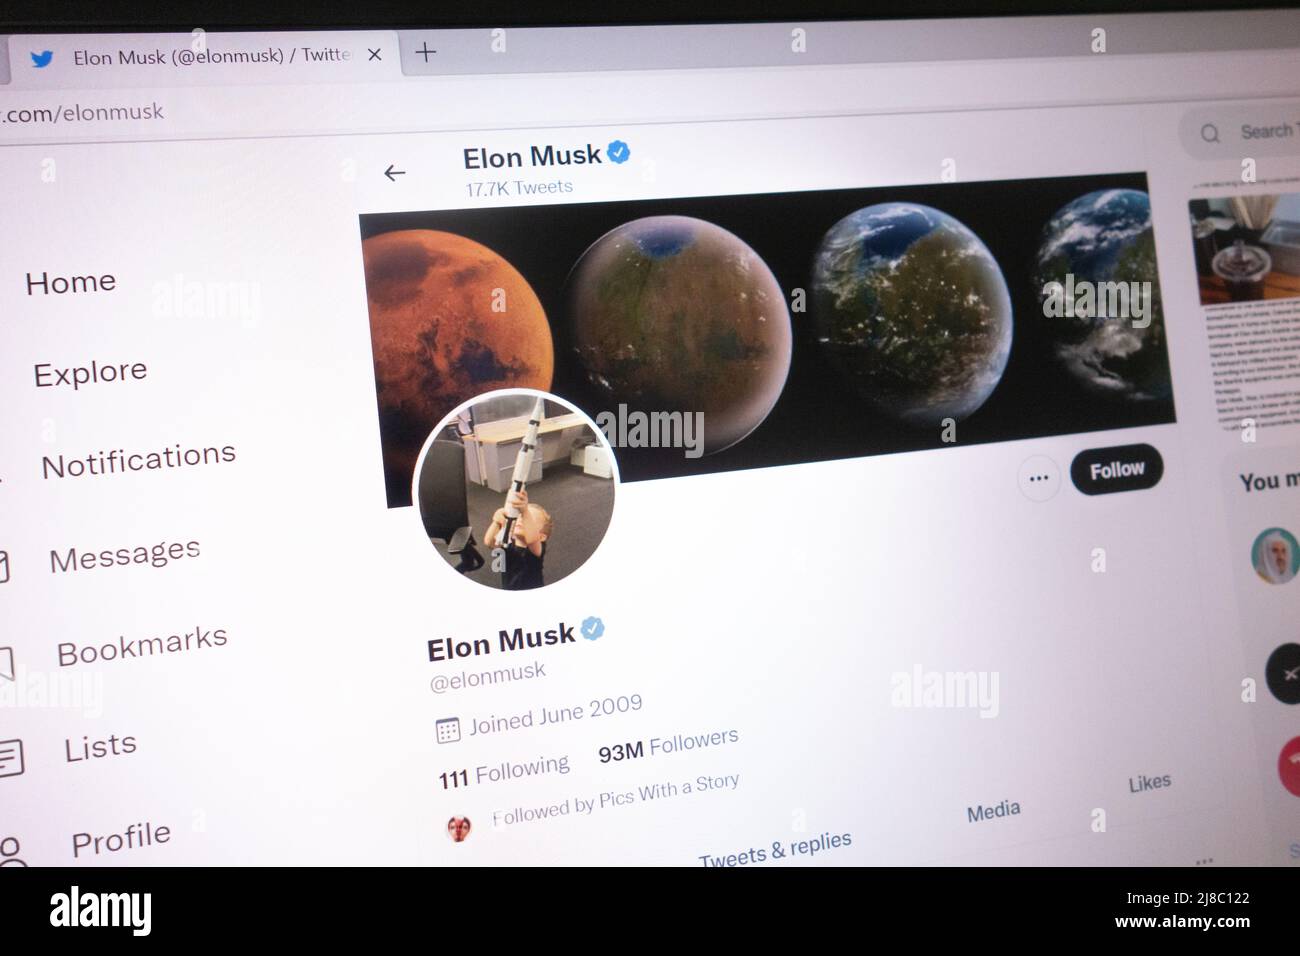 KONSKIE, POLAND - May 14, 2022: Elon Musk official Twitter account displayed on laptop screen Stock Photo